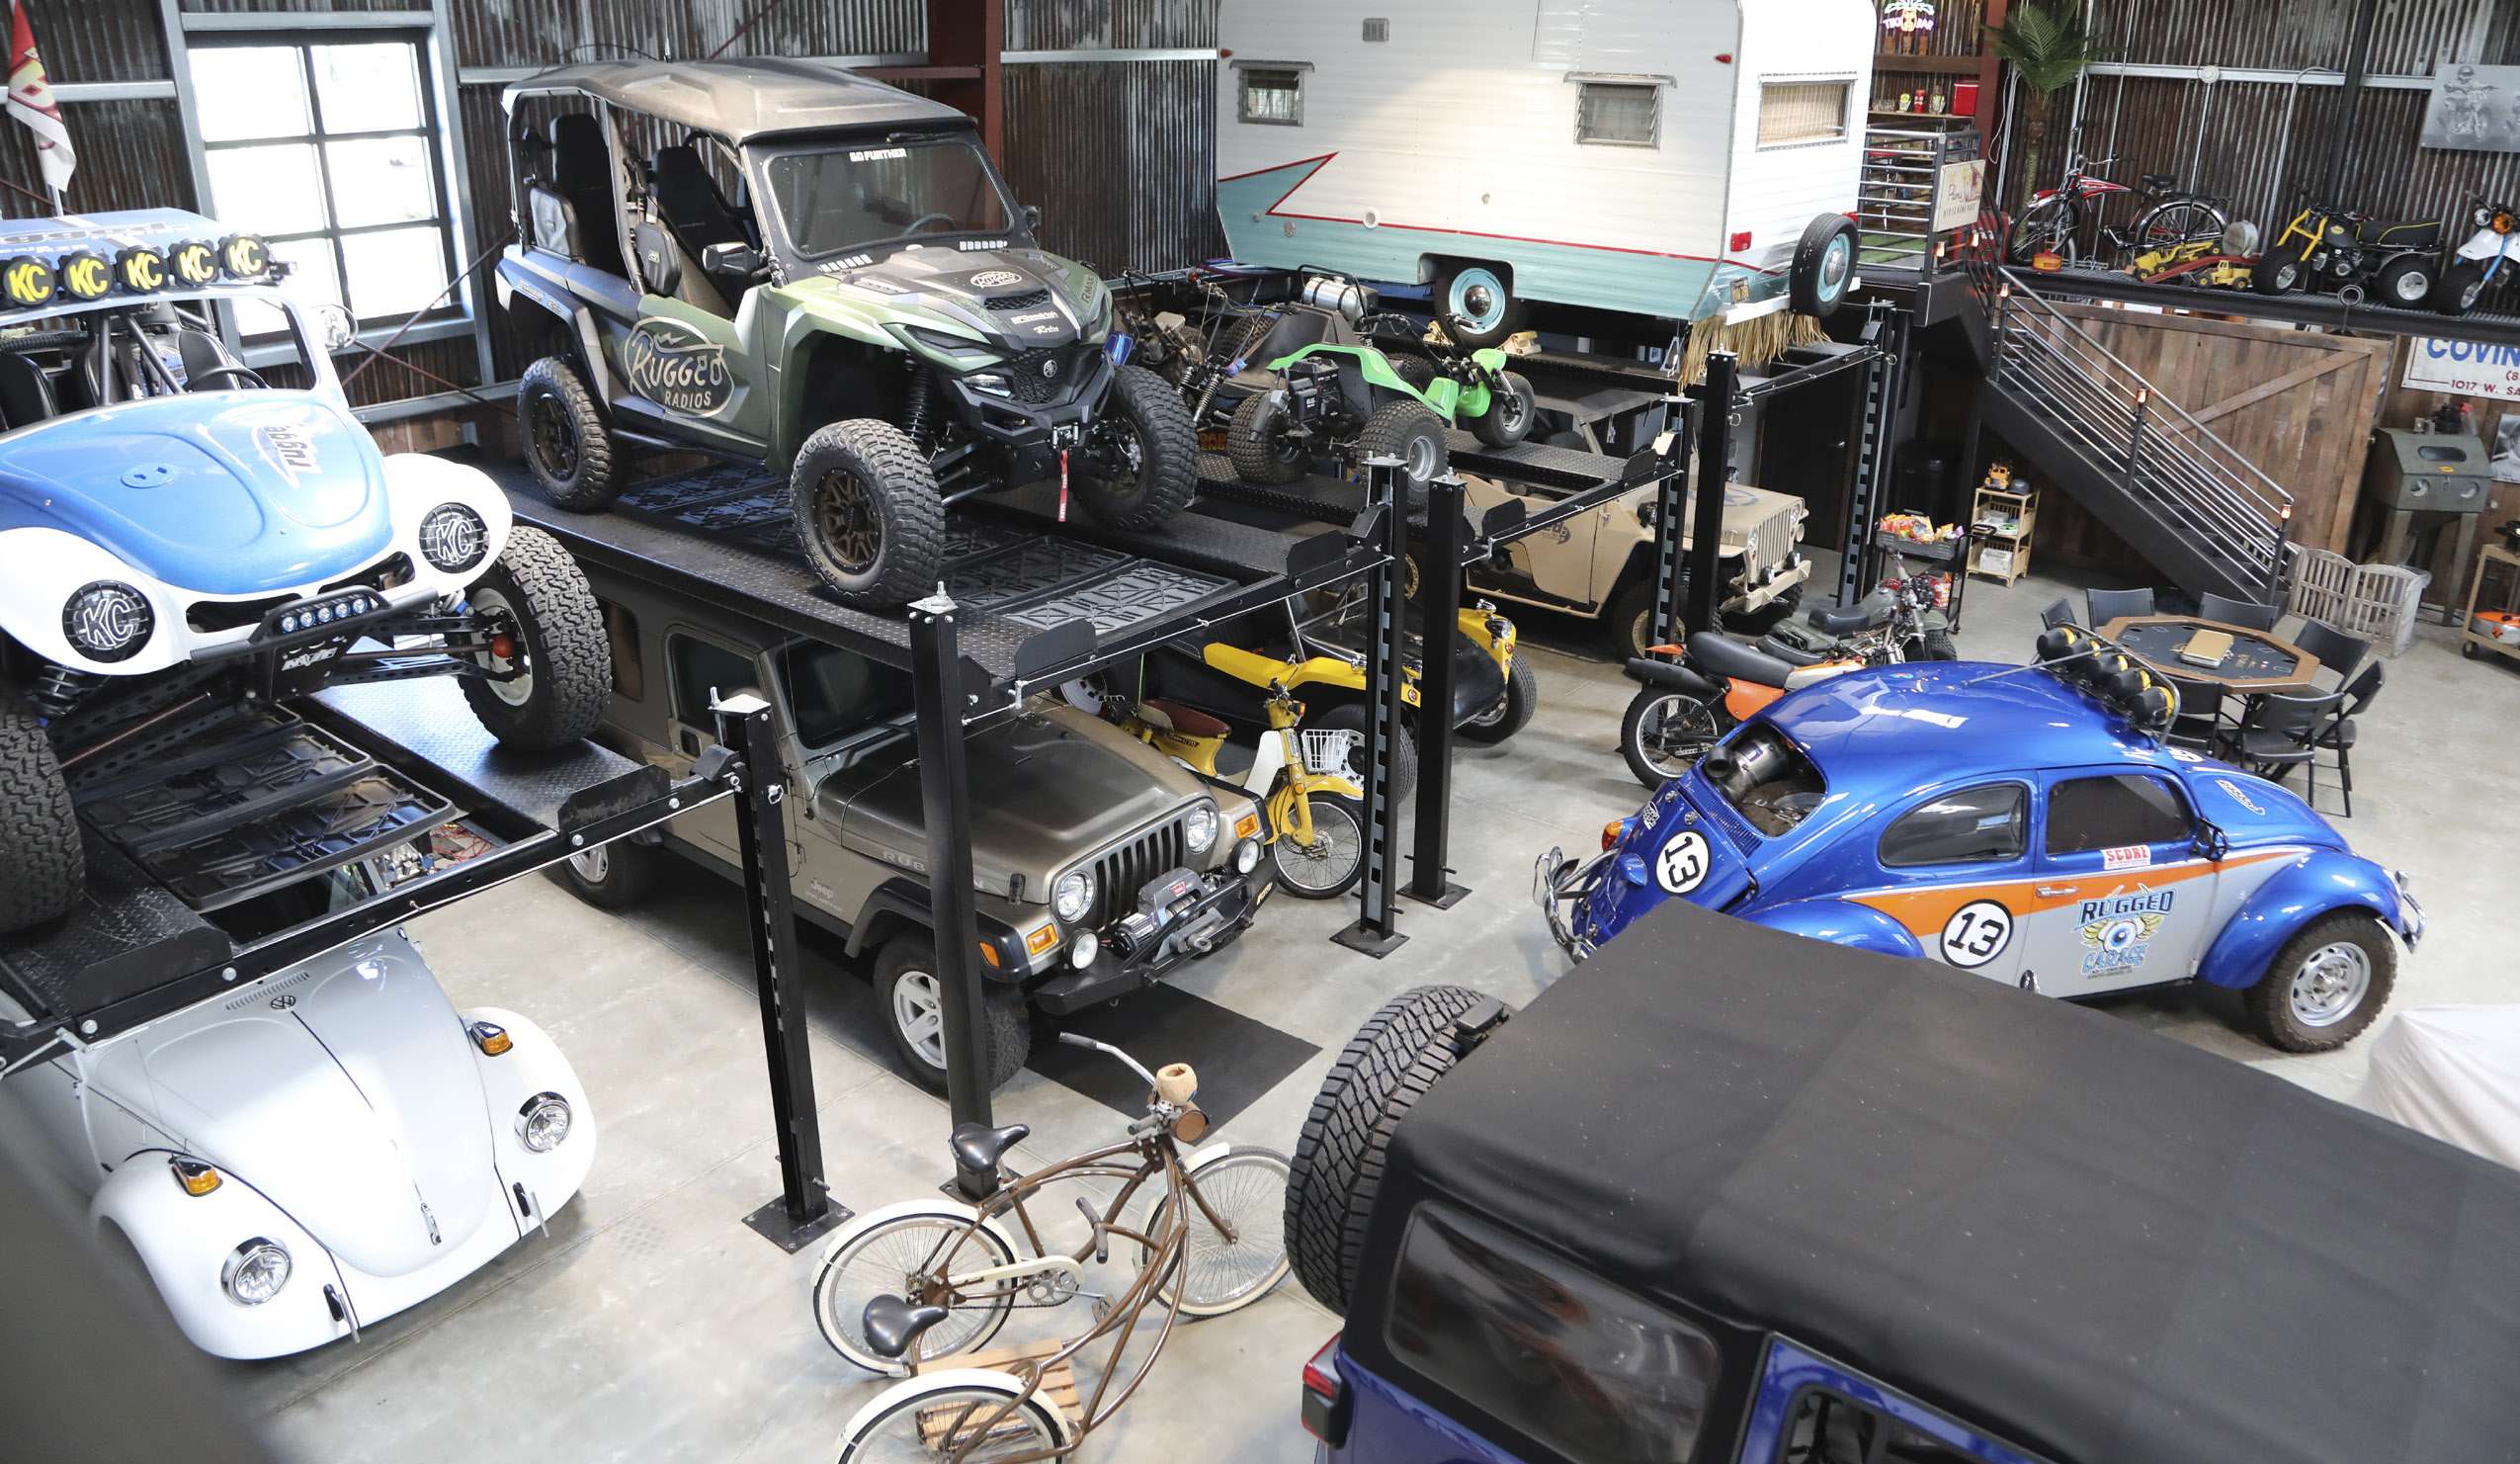 The Garage is an area where vehicles are worked on and new products are prototyped